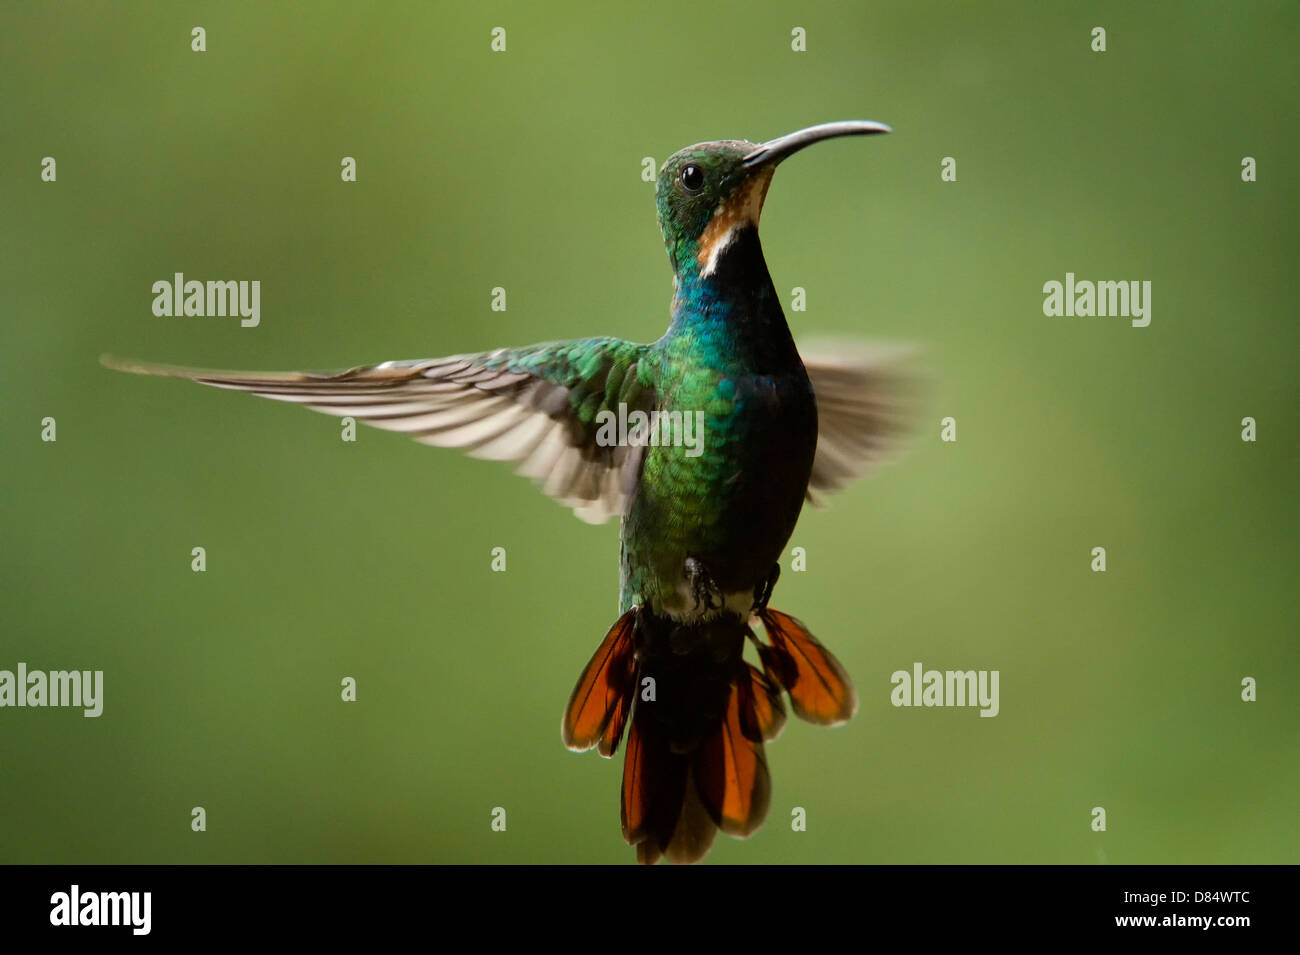 green-breasted mango hummingbird flying in Costa Rica, Central America Stock Photo